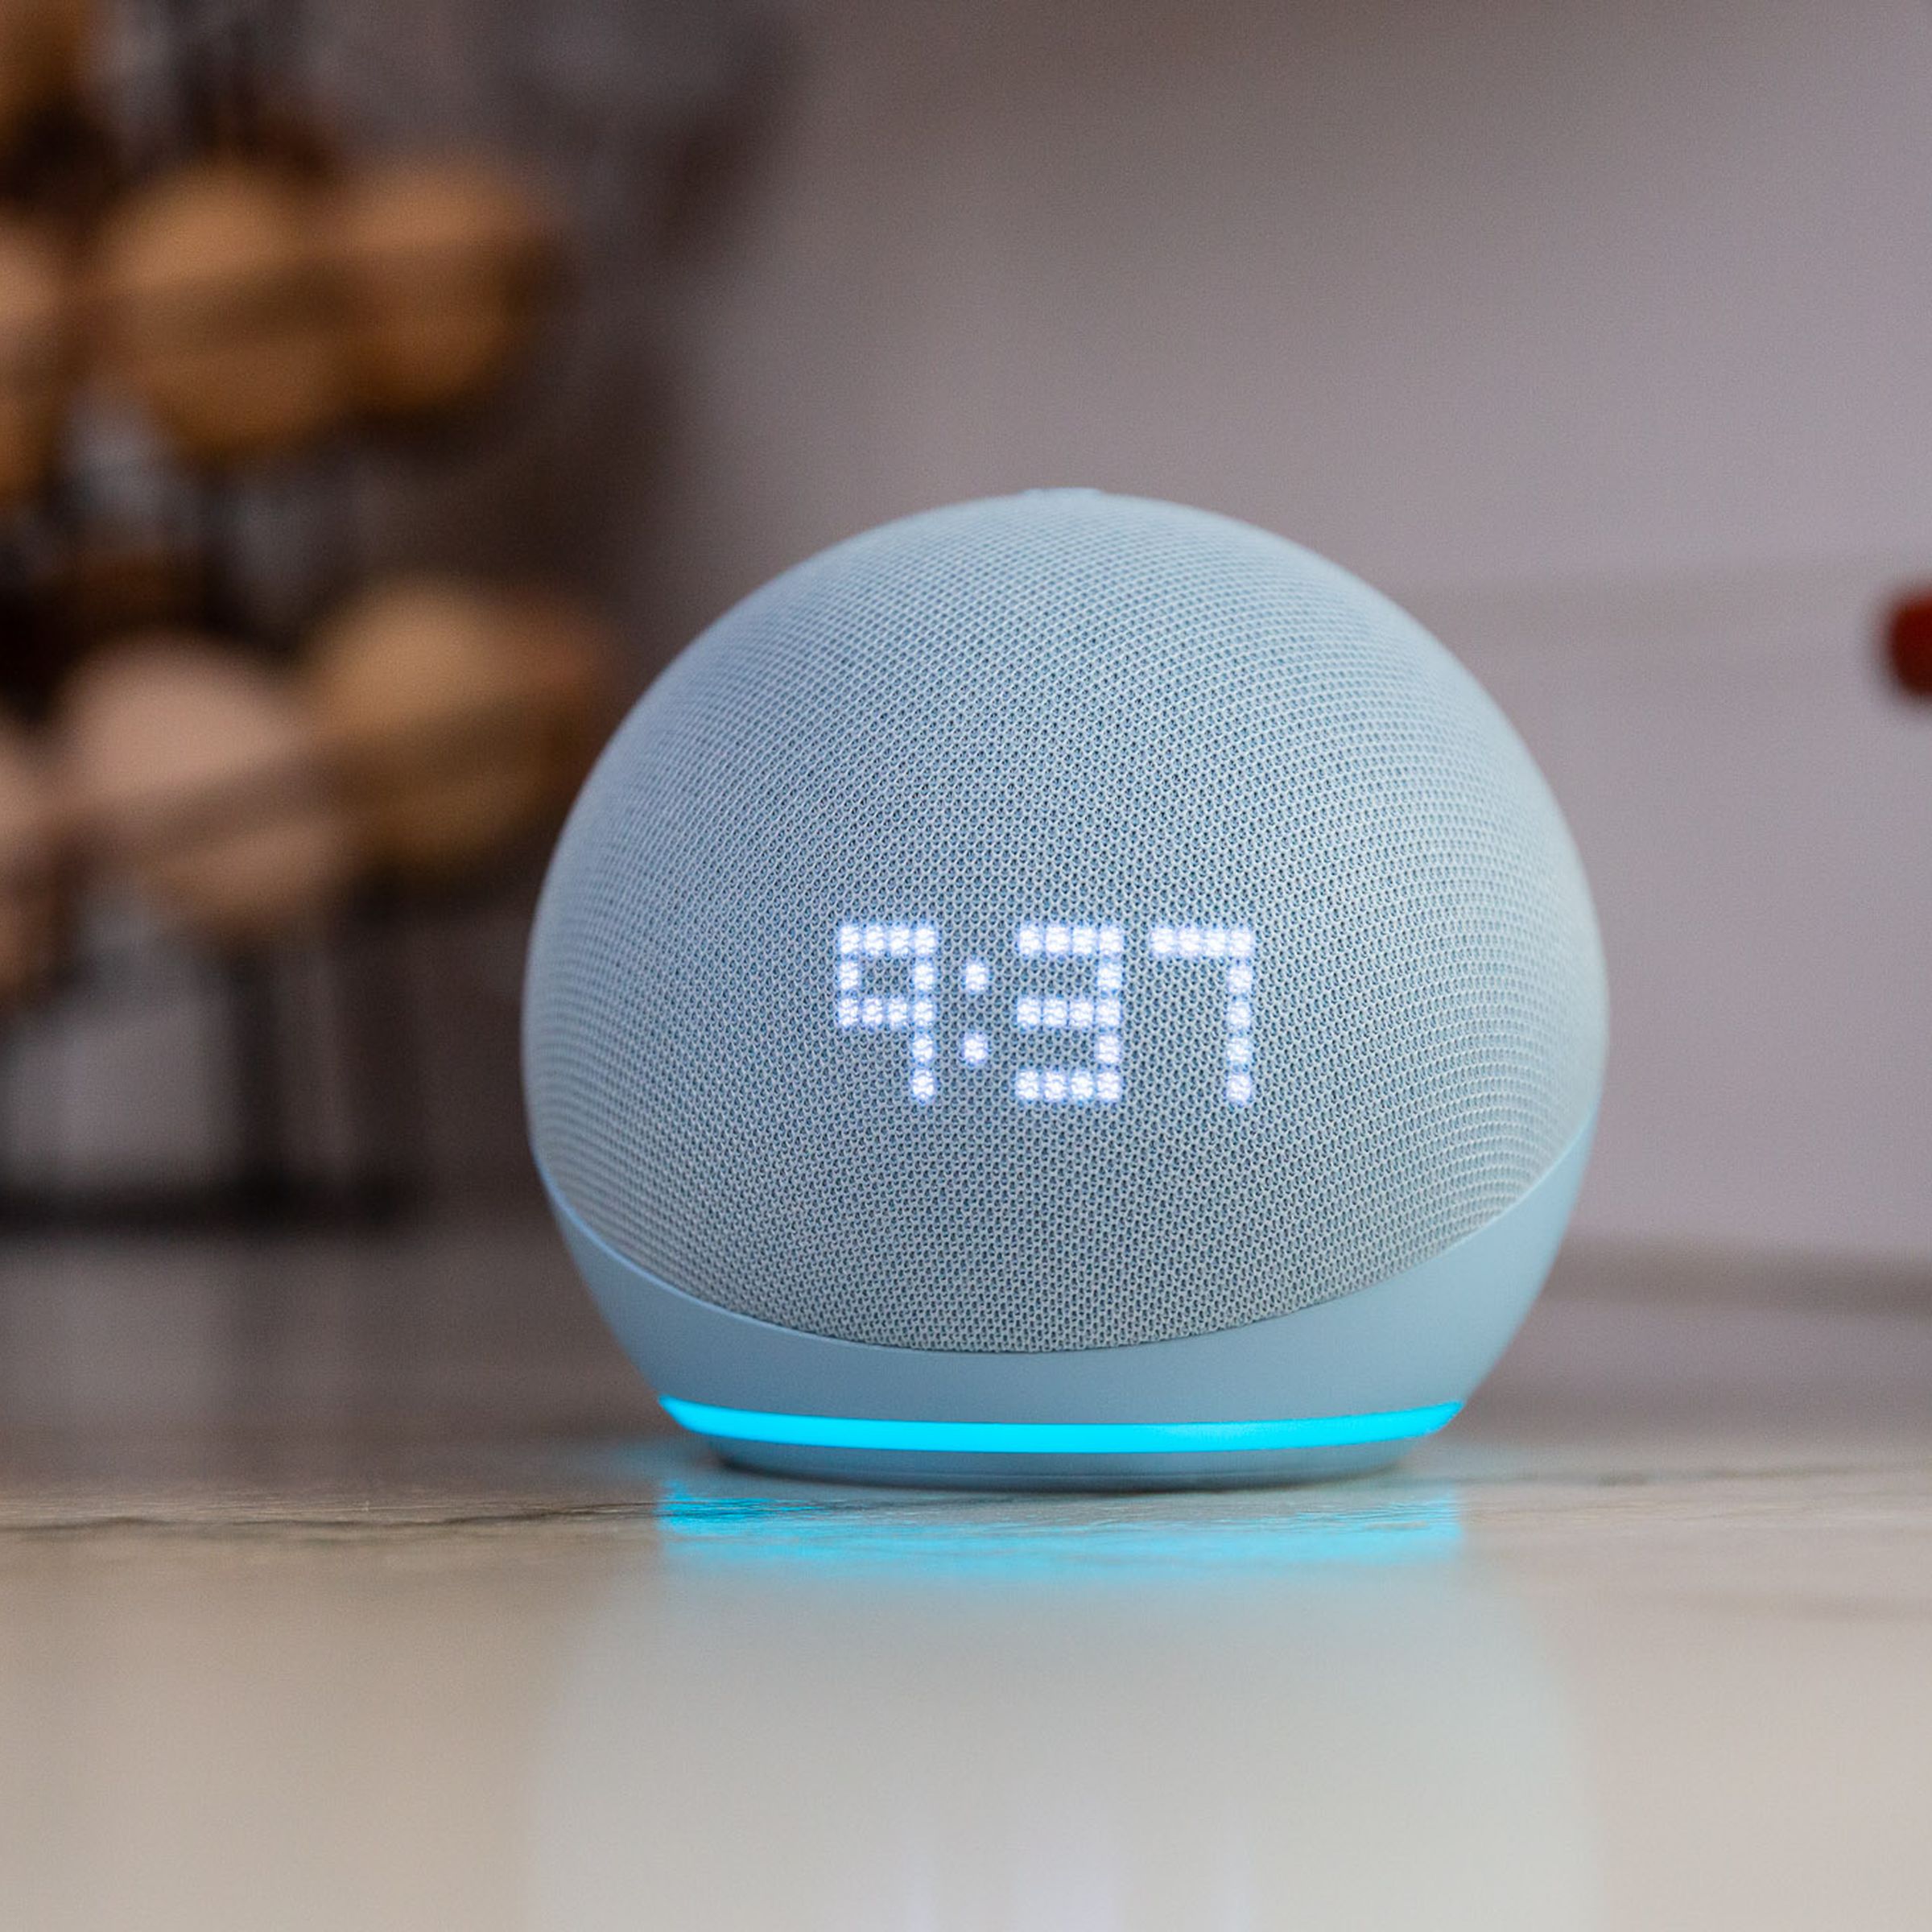 An echo dot with clock on a desk